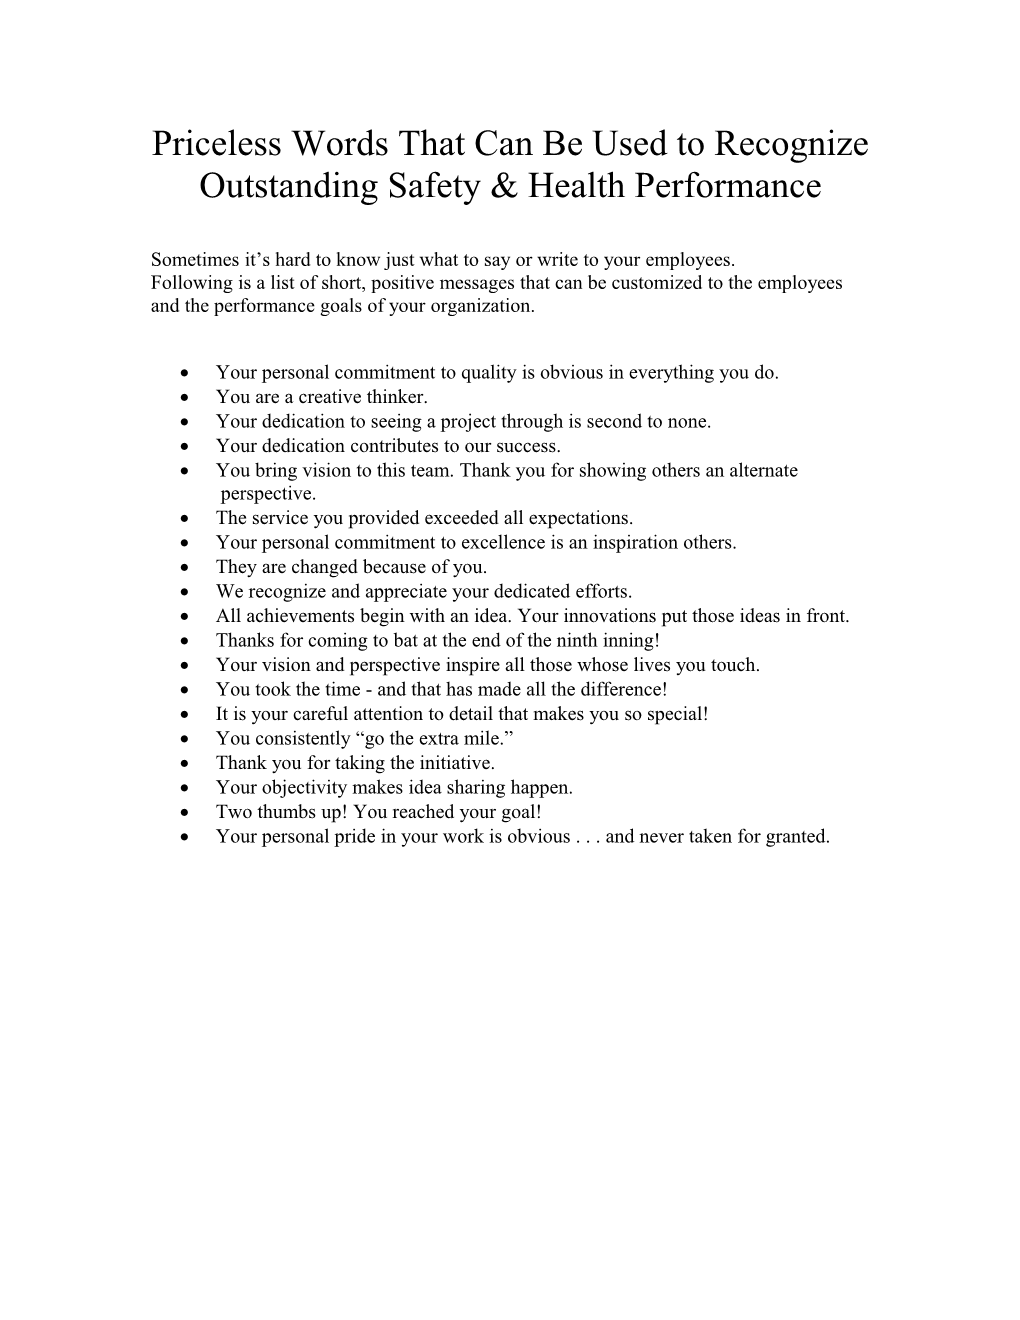 Priceless Words That Can Be Used To Recognized Outstanding Safety & Health Performance